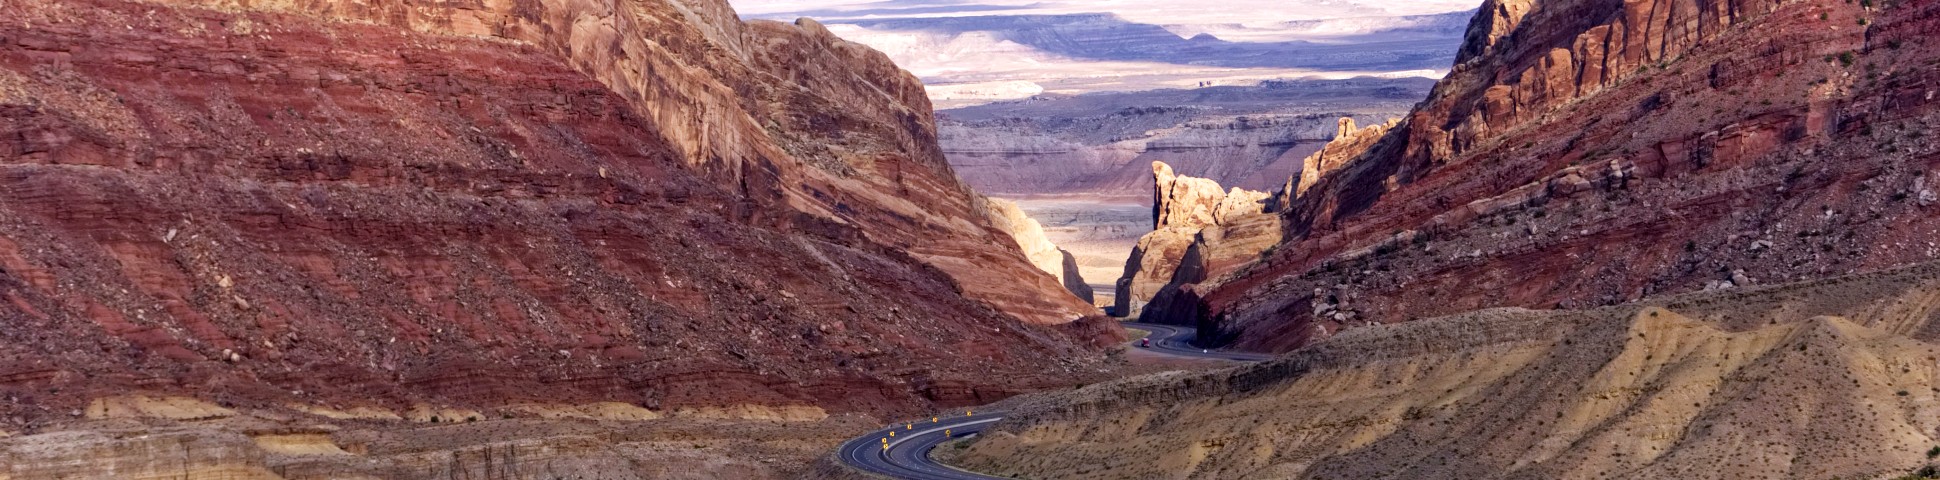 Windy road among the red rock formations in Utah